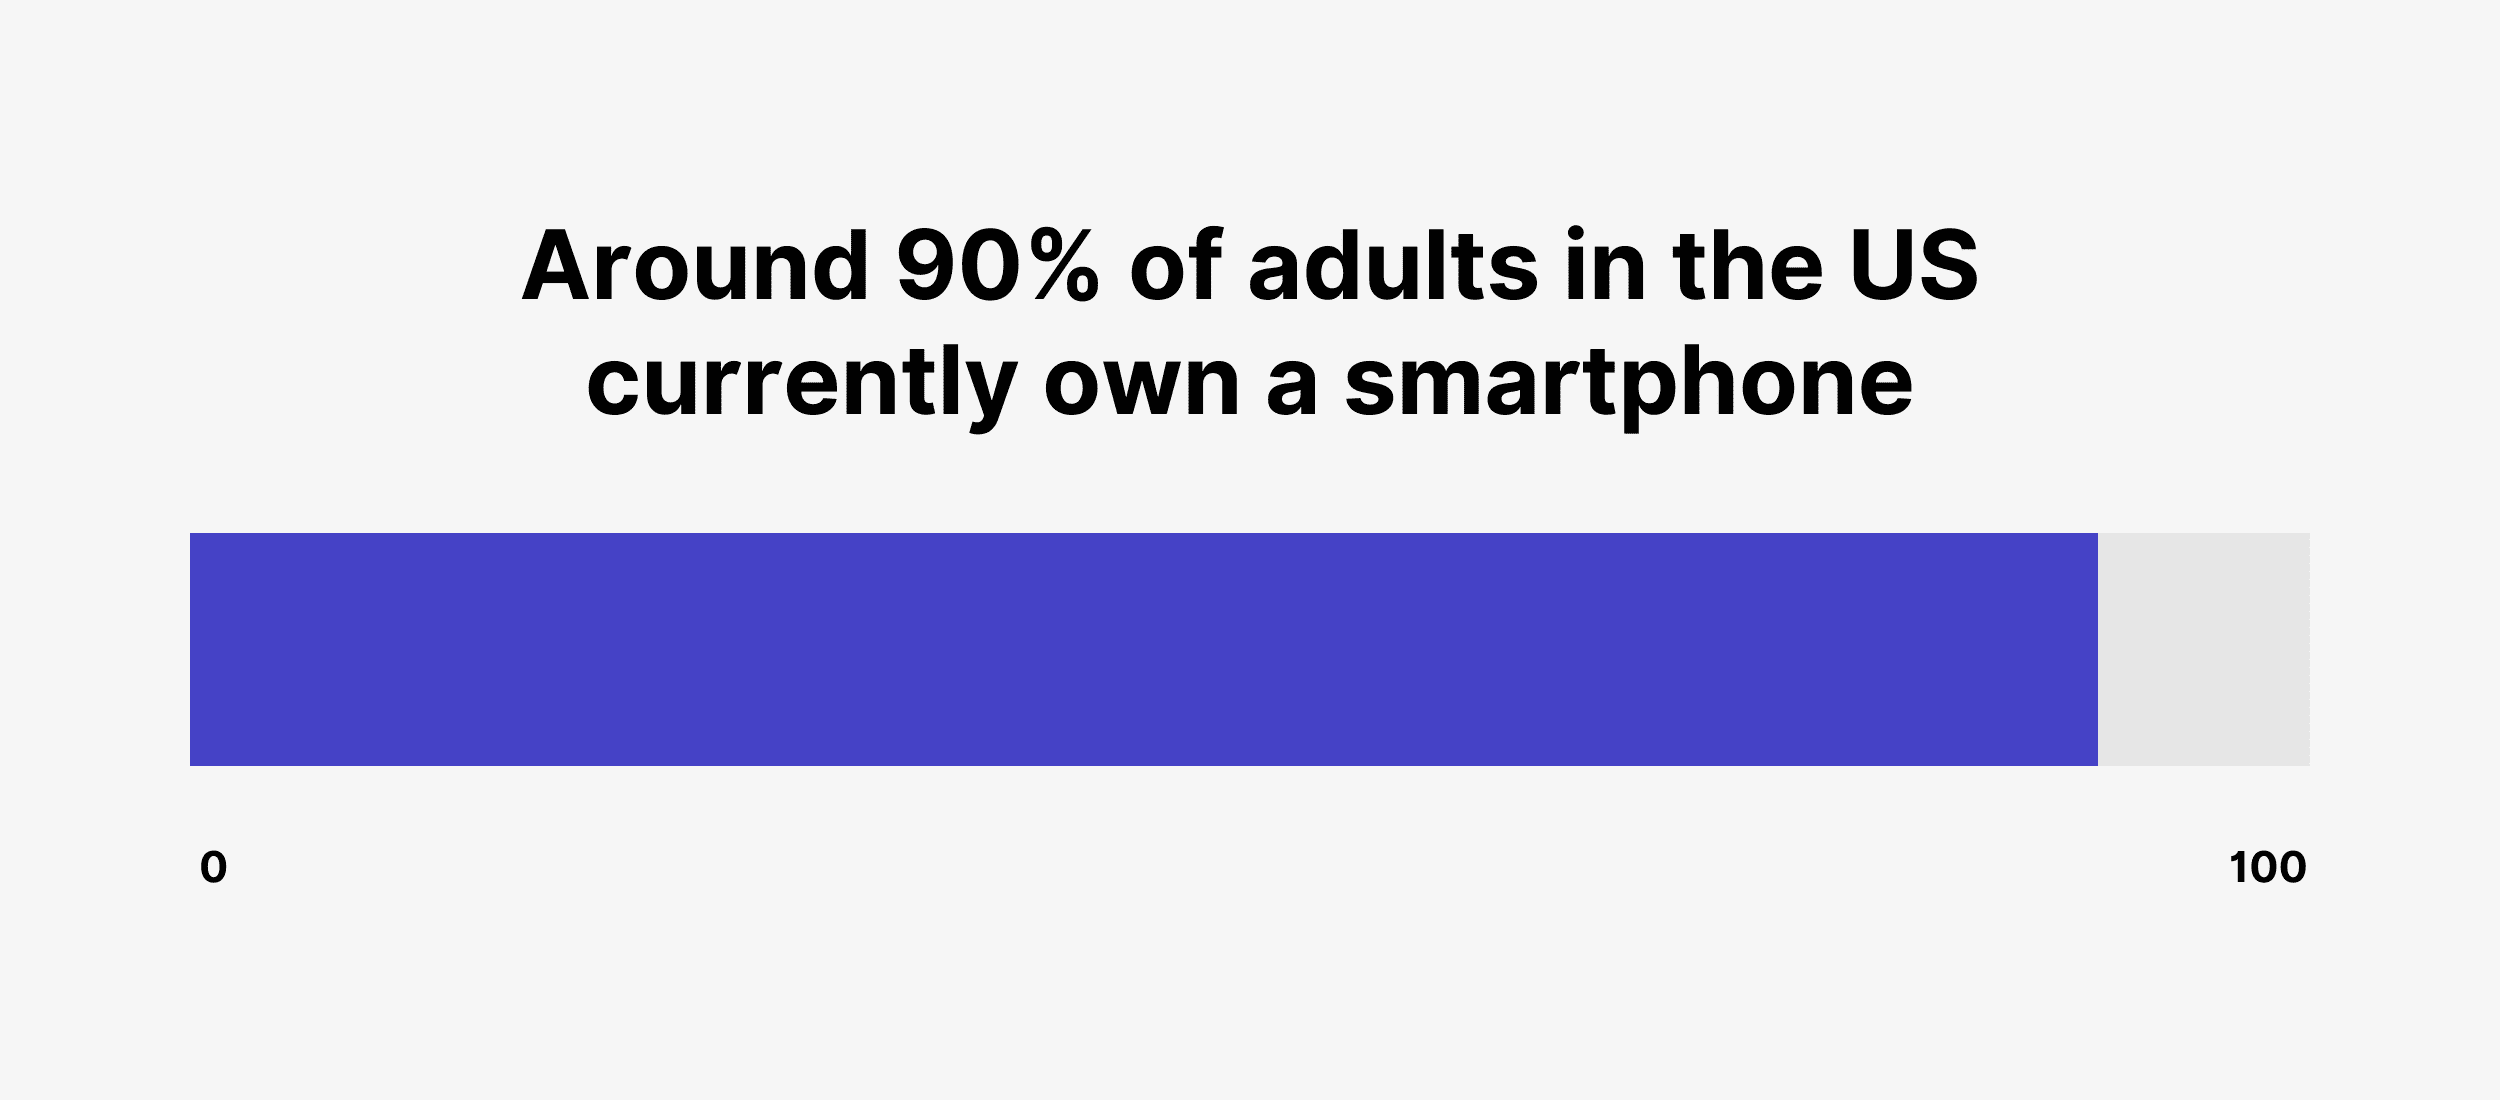 Around 90% of adults in the US currently own a smartphone